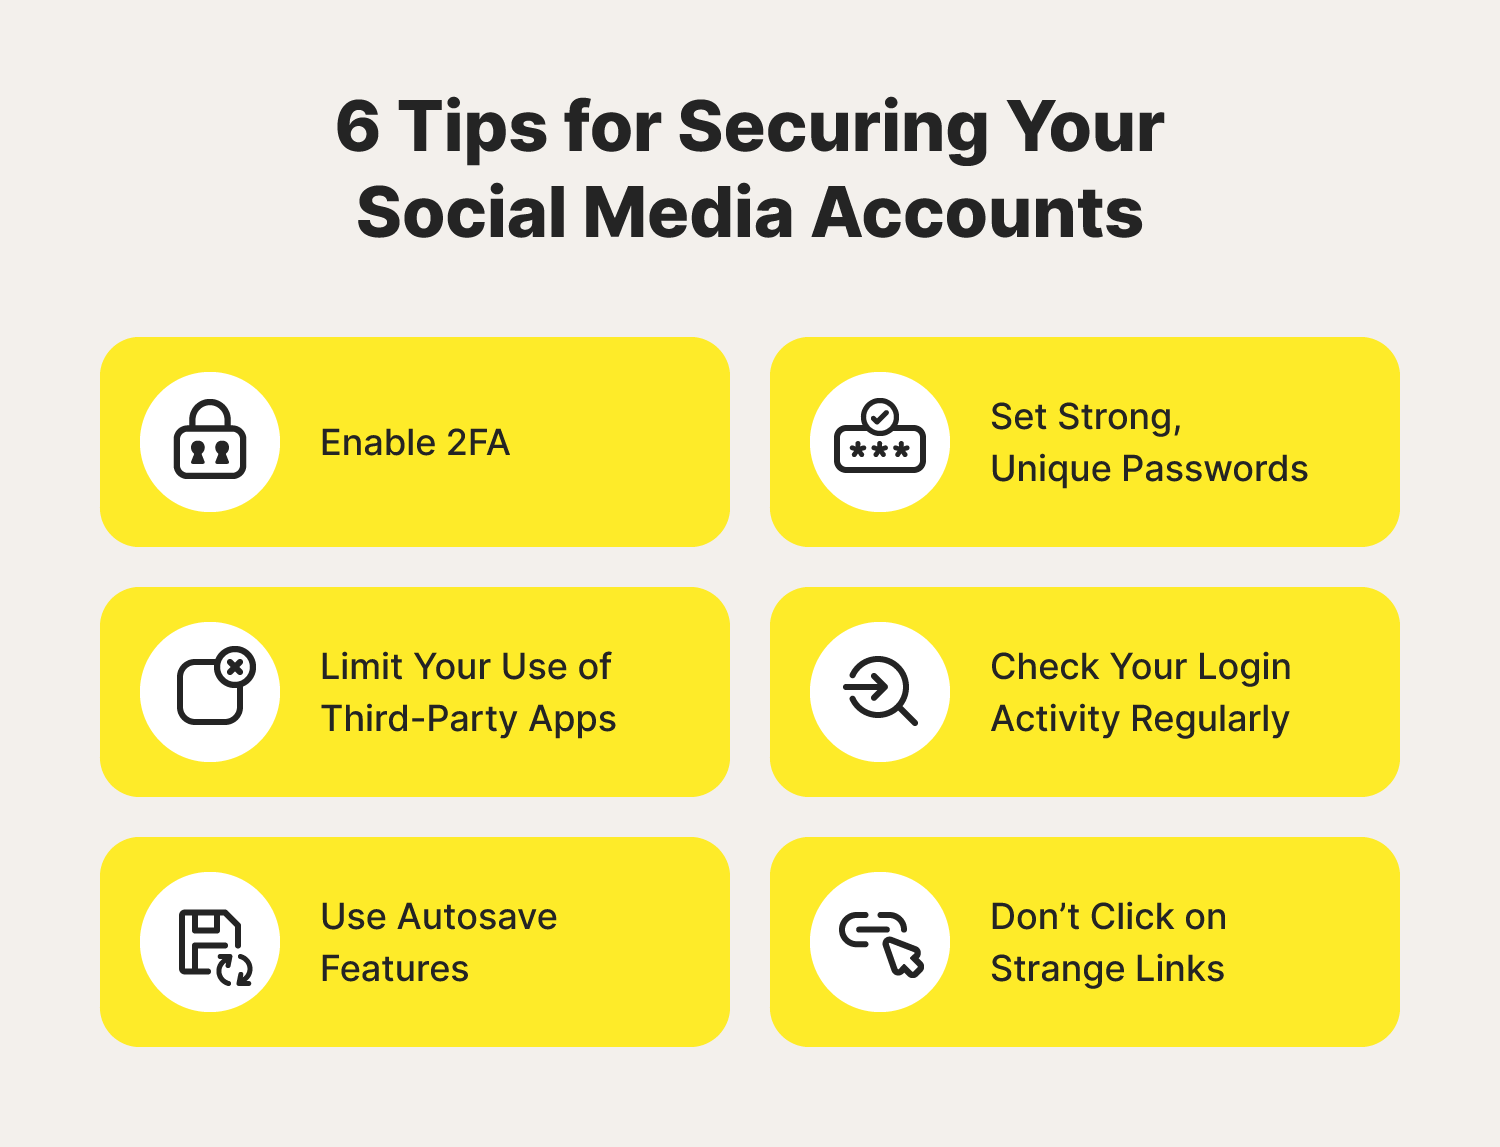 Illustrated chart covering tips for securing social media accounts to avoid being hacked.